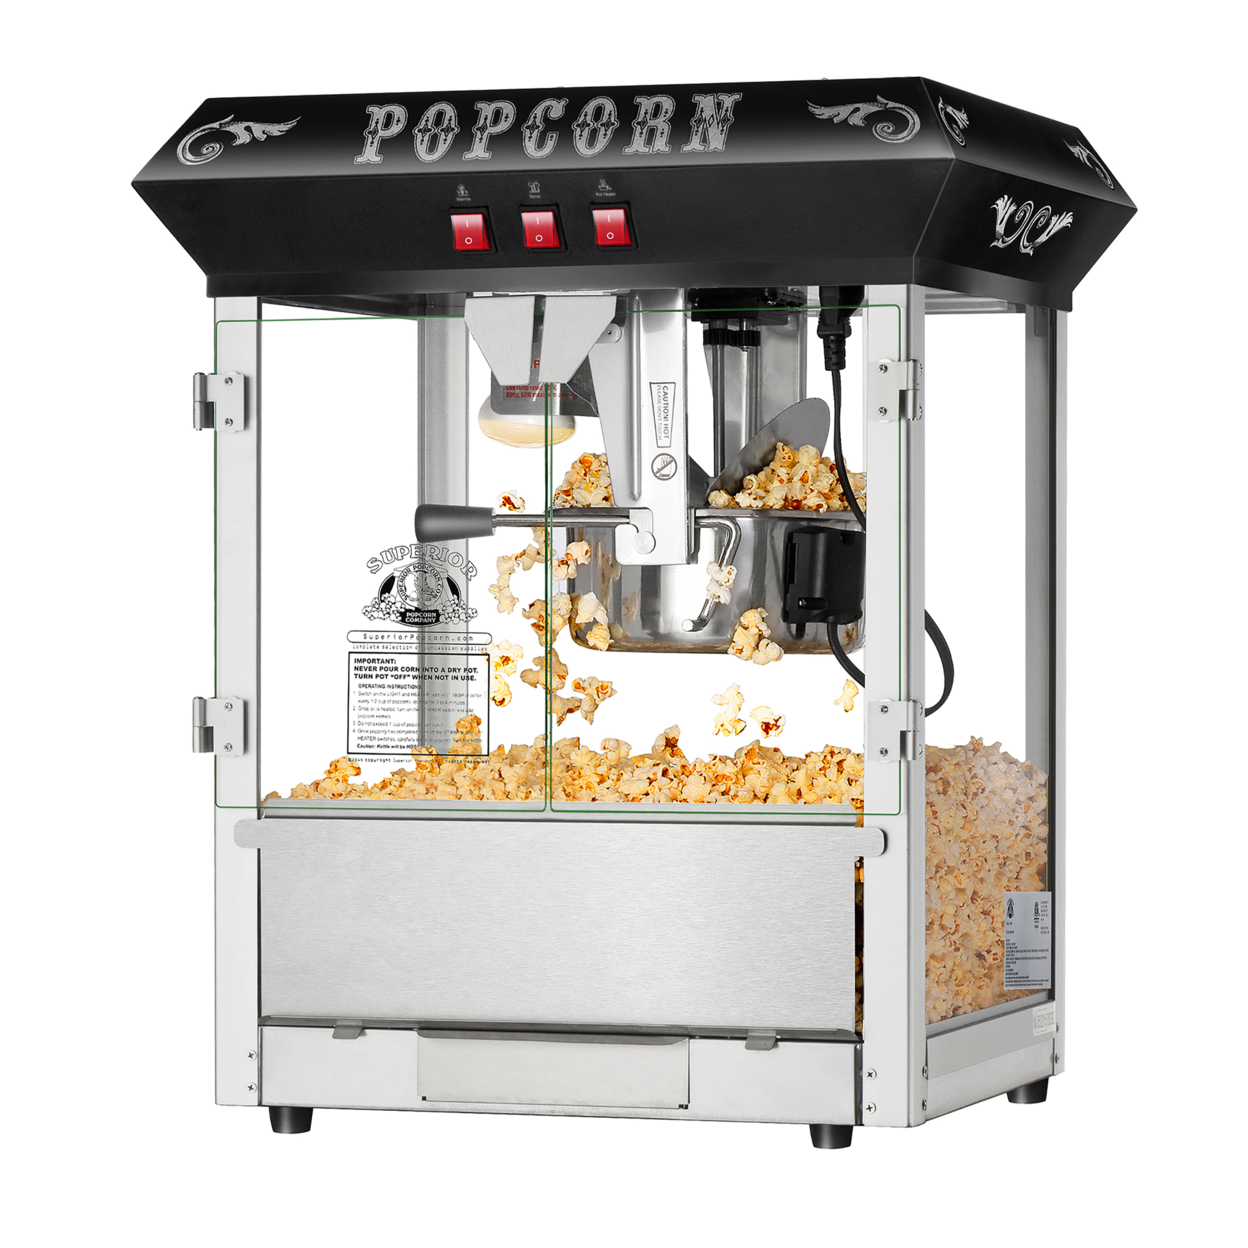 Hot And Fresh Countertop Style Popcorn Popper Machine-Makes Approx. 3 Gallons Per Batch- By Superior Popcorn Company- (8 Oz., Black)